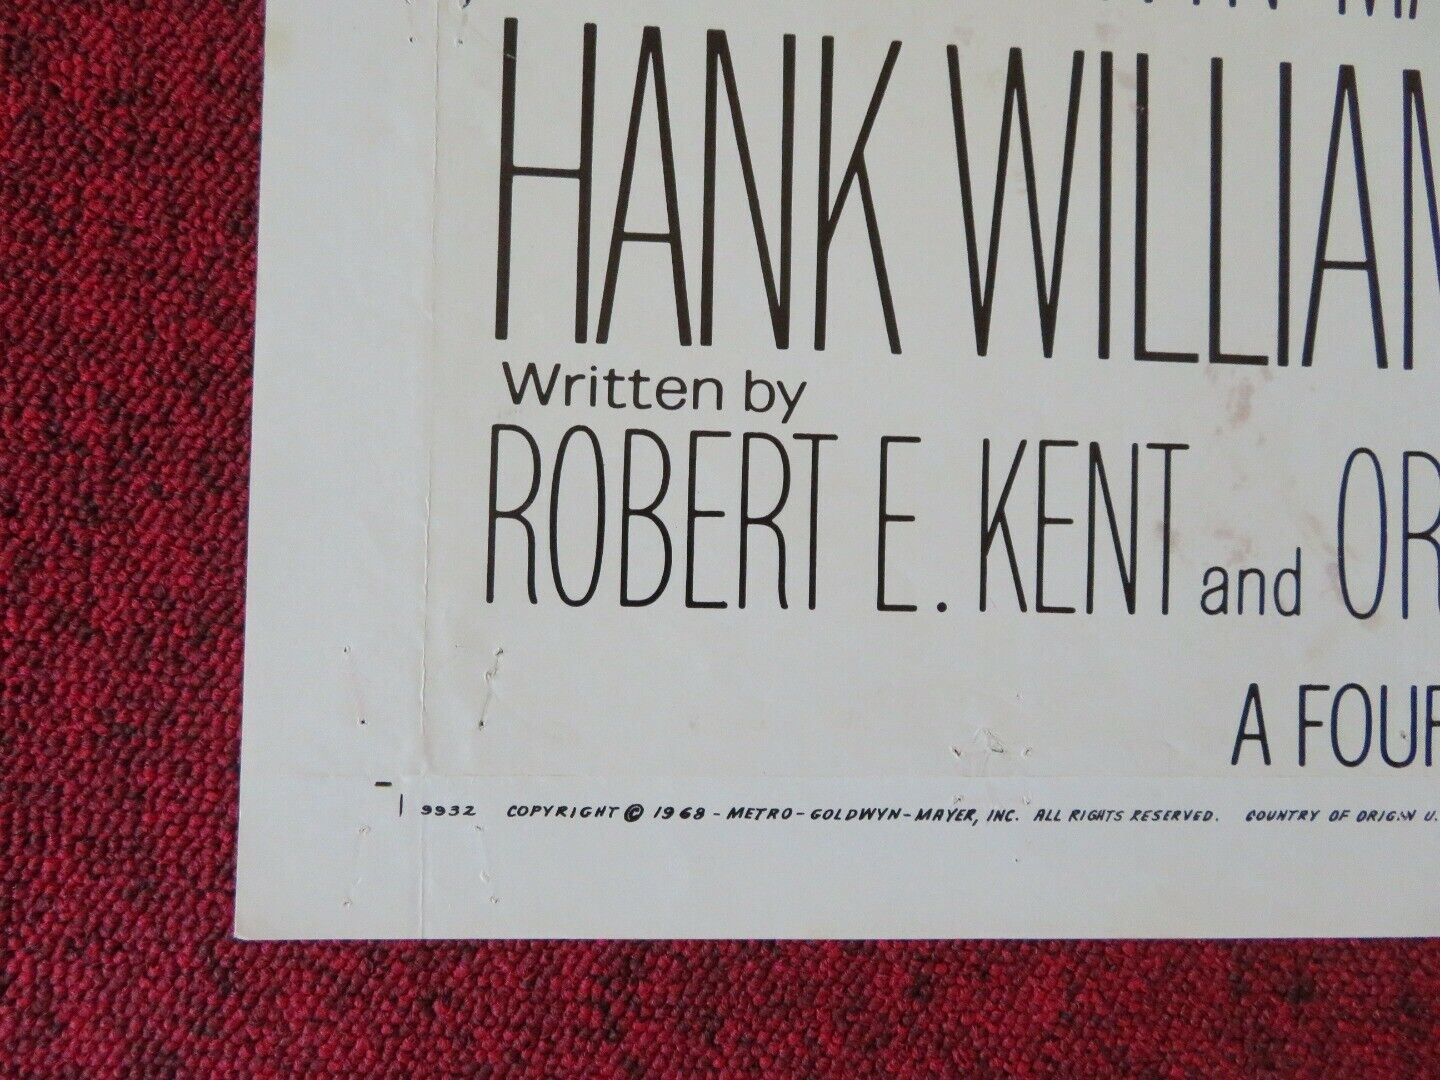 A TIME TO SING  FOLDED US ONE SHEET POSTER HANK WILLIAMS 1968